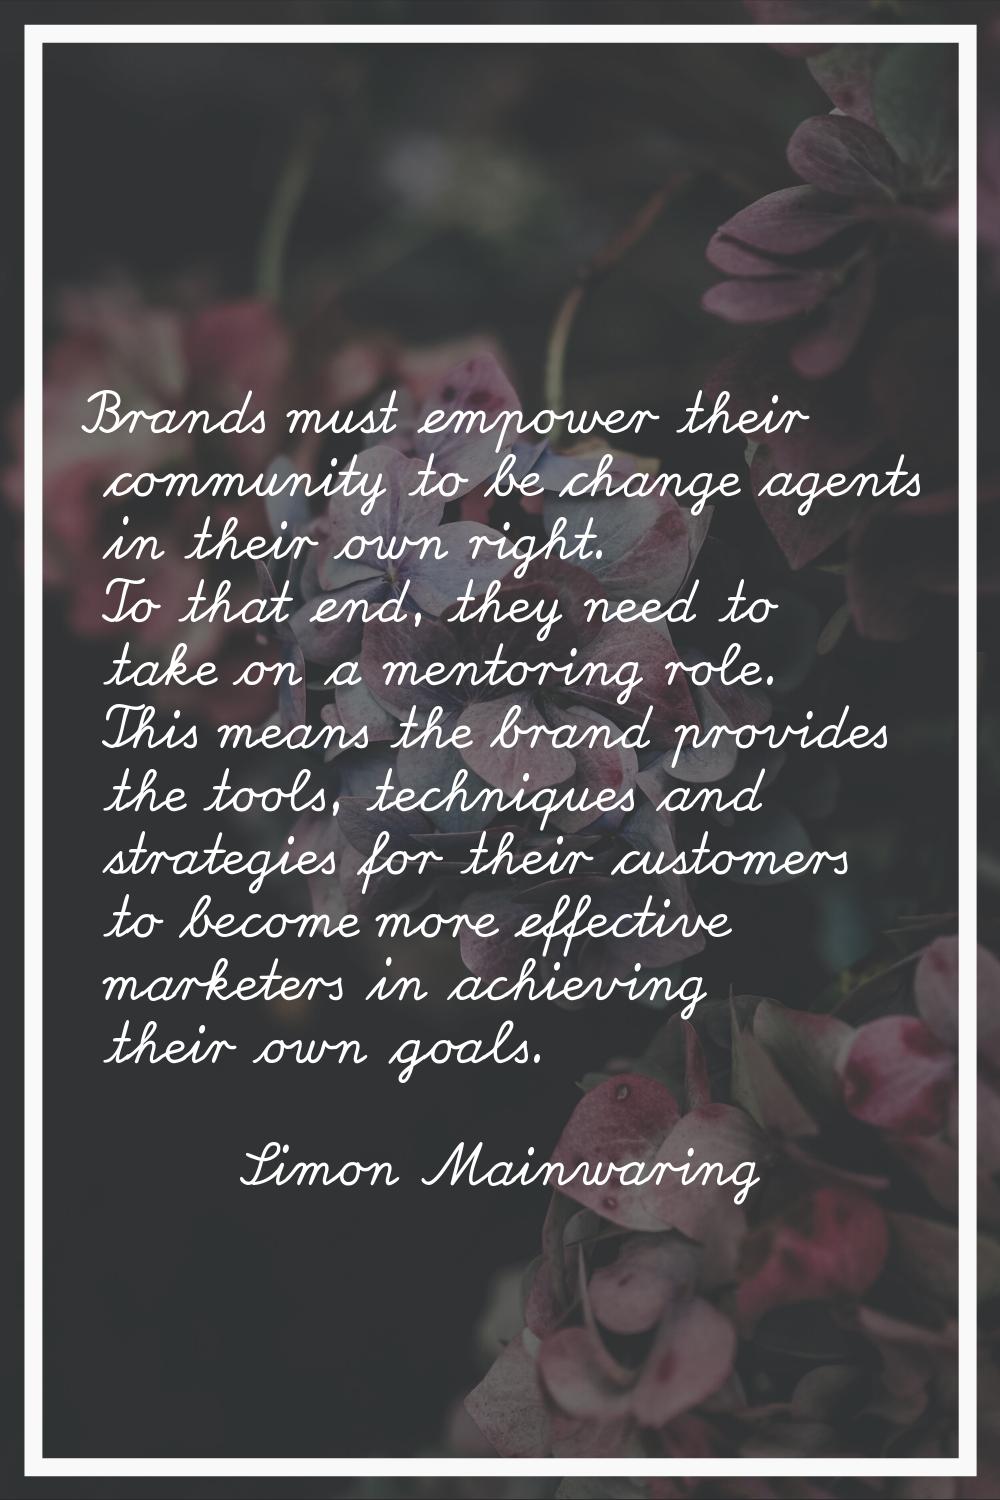 Brands must empower their community to be change agents in their own right. To that end, they need 